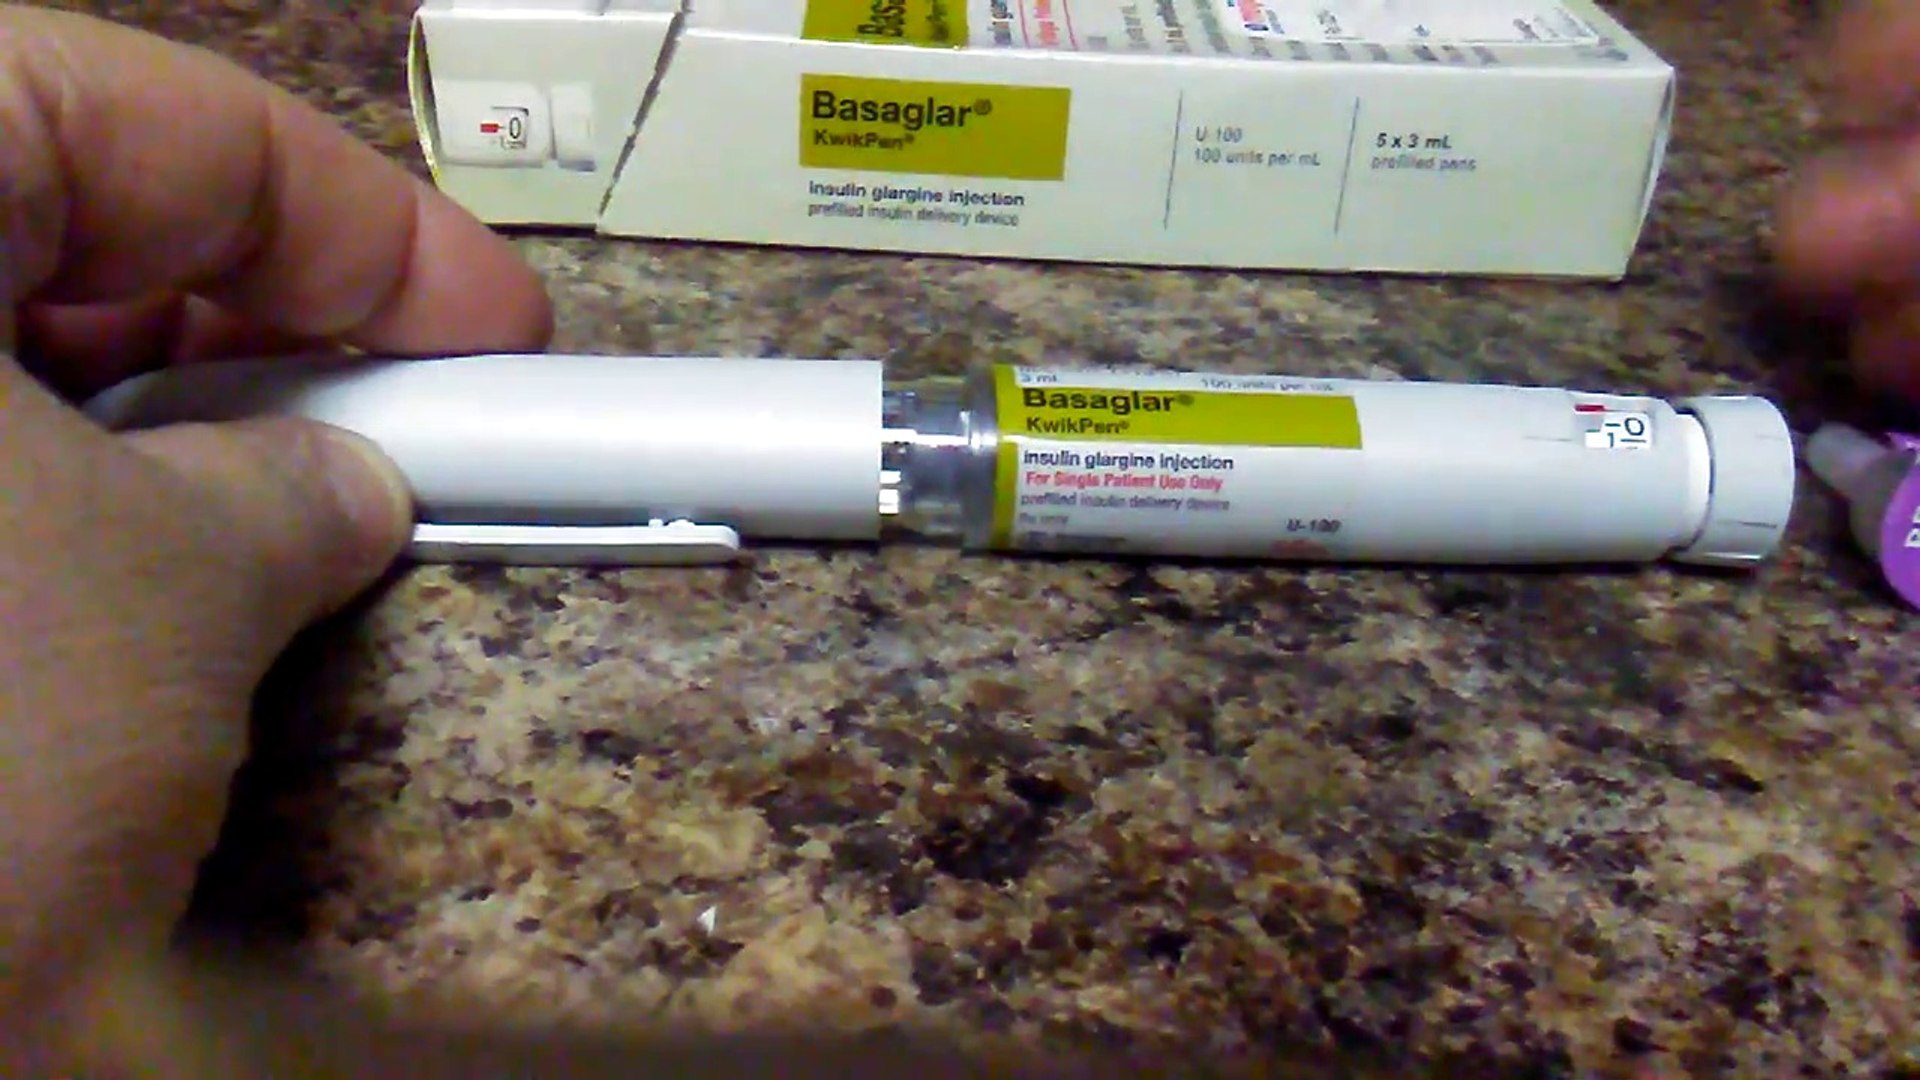 How to inject and use Basaglar insulin Pen for Diabetes - video Dailymotion